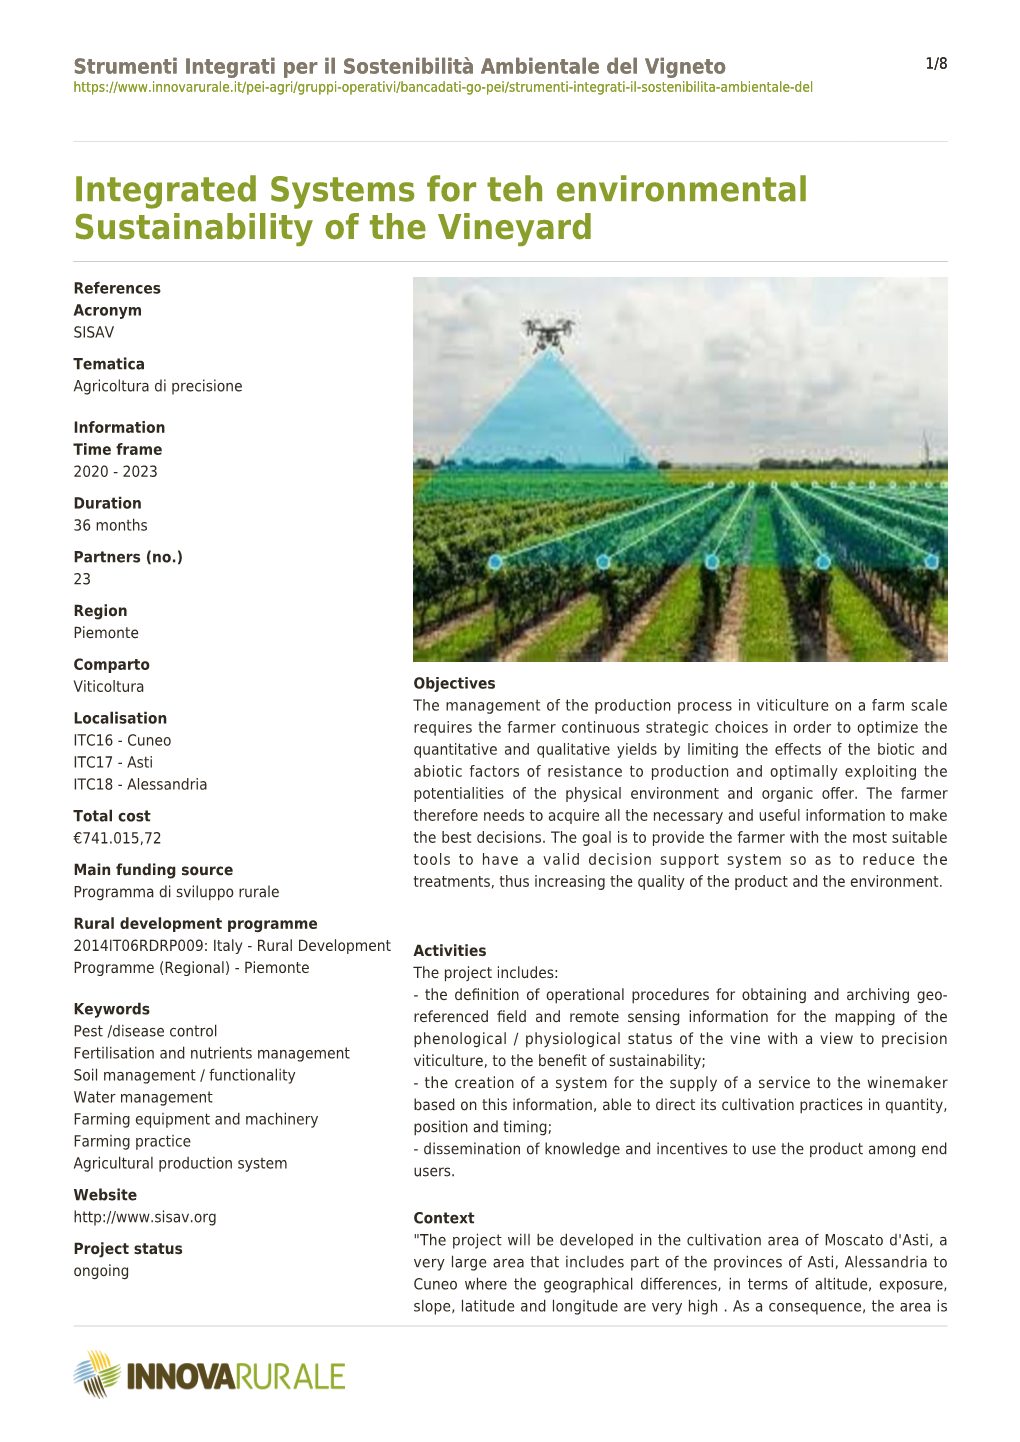 Integrated Systems for Teh Environmental Sustainability of the Vineyard